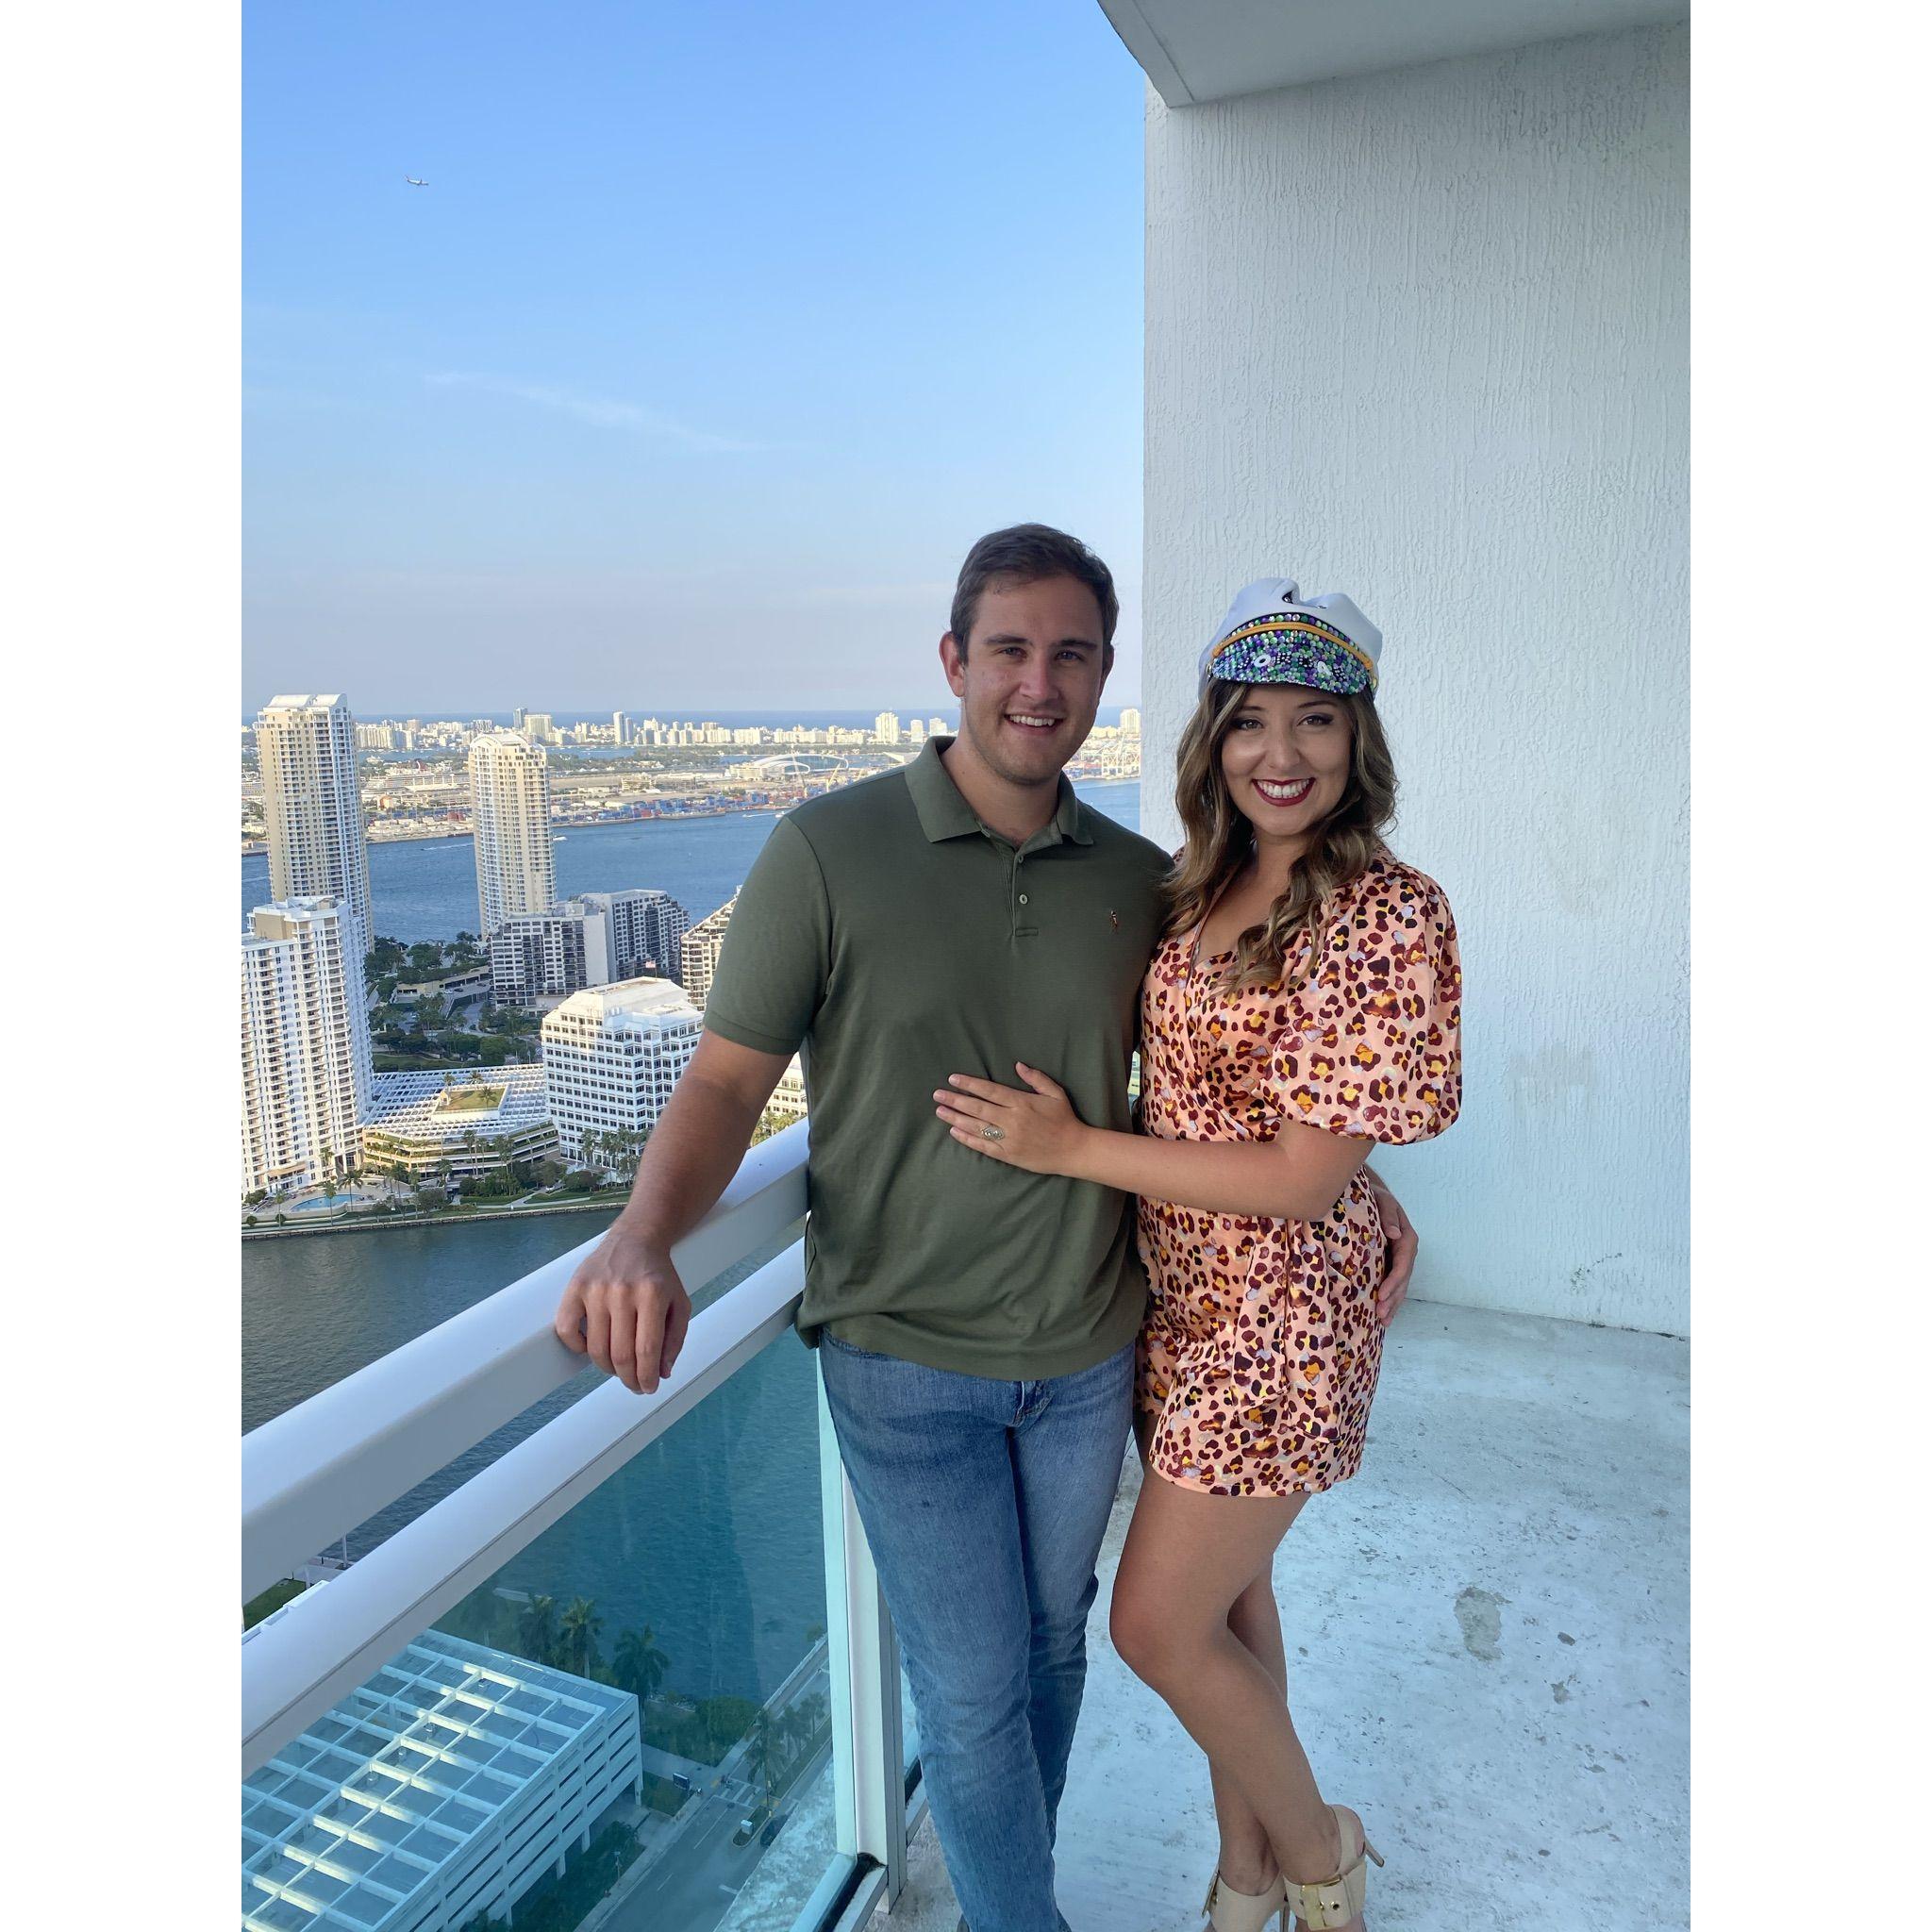 Jordan's 26th Birthday, together in their new home in Brickell, Miami.